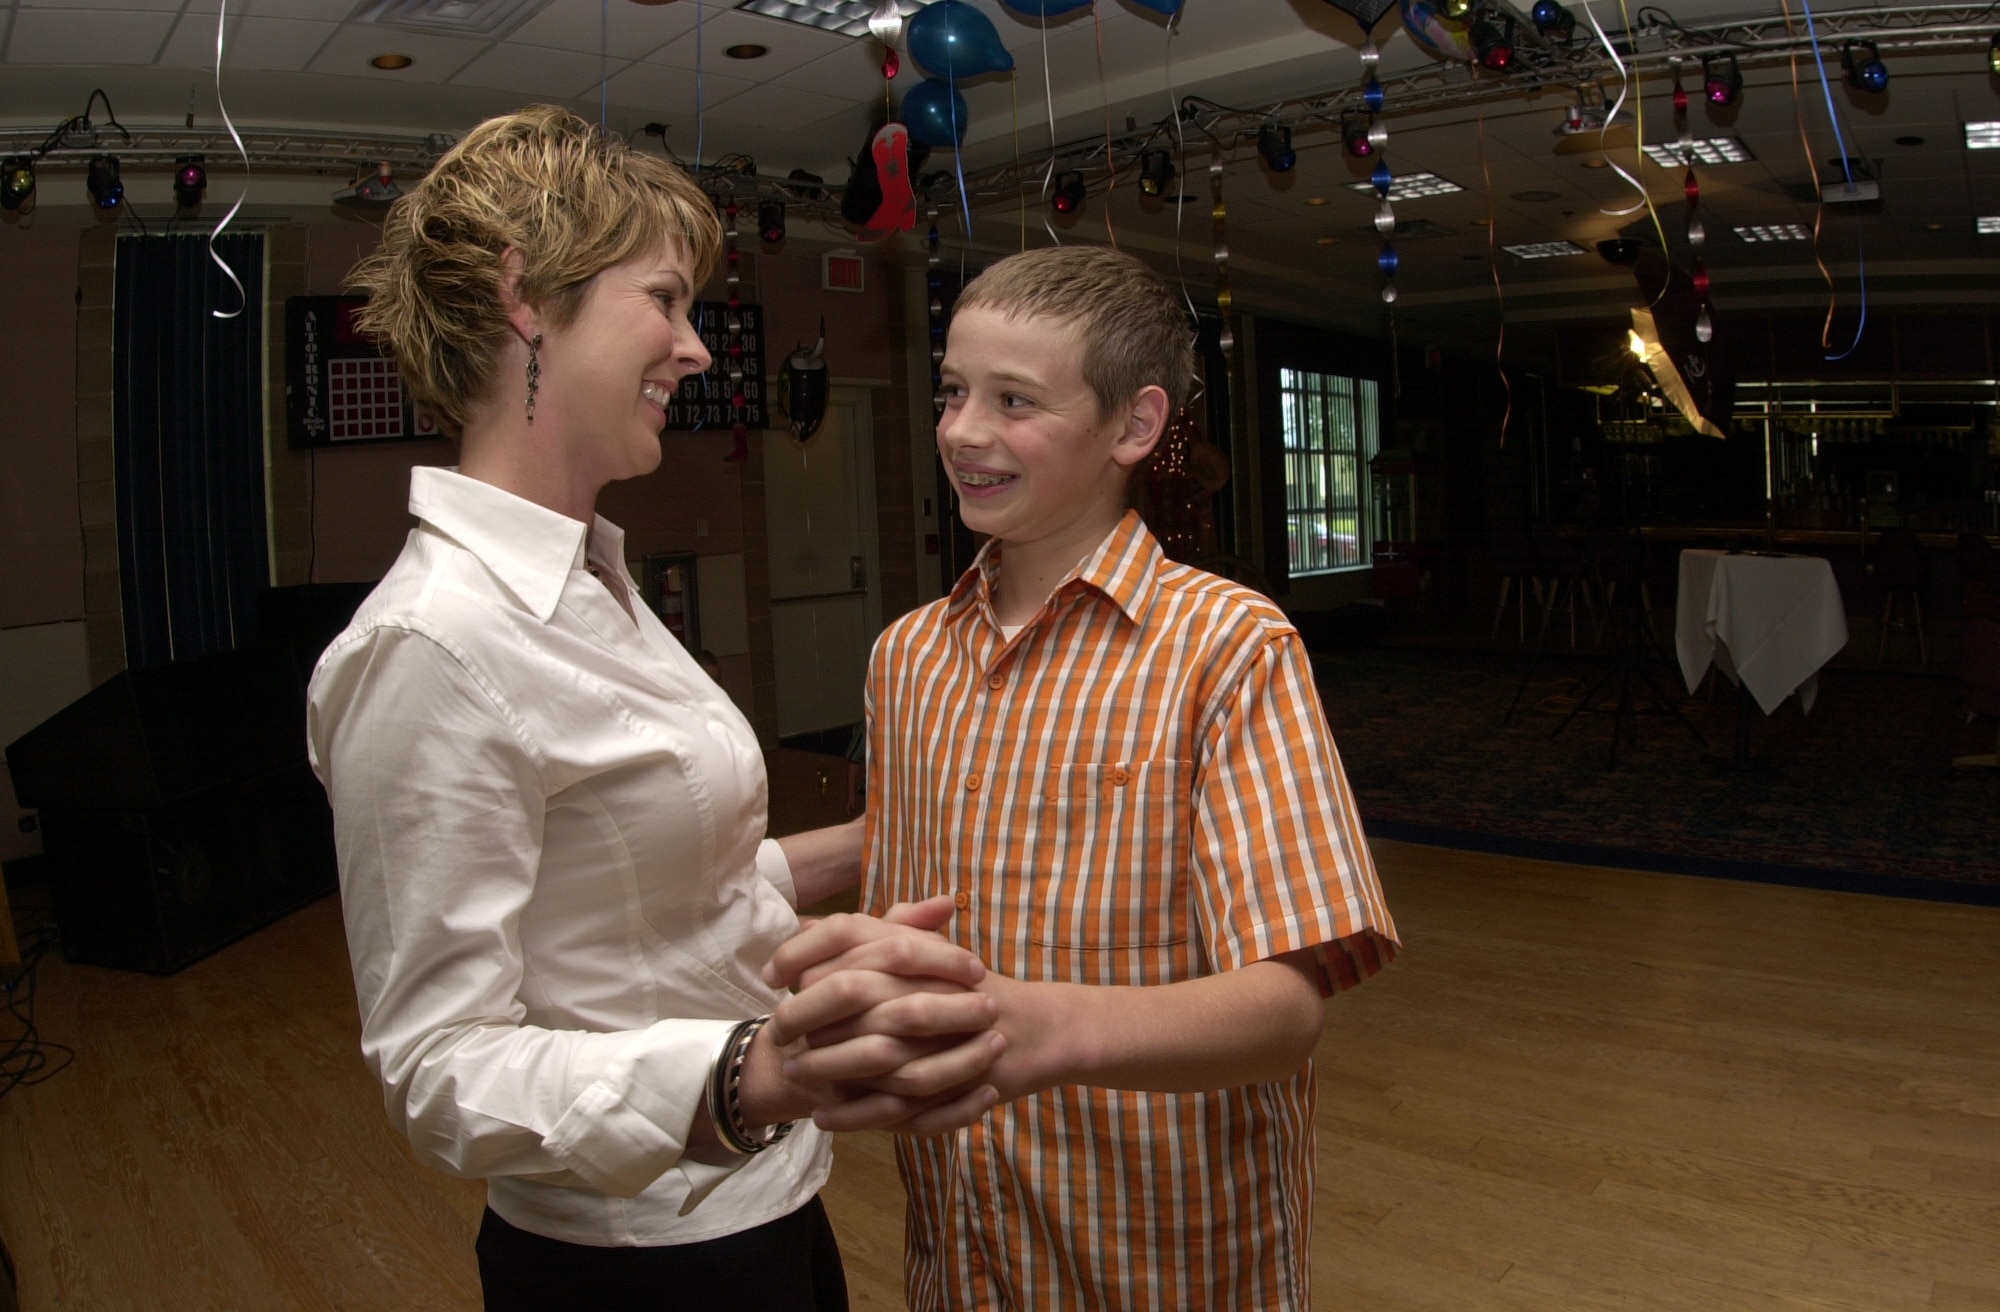 Jan Menard and her 12-year-old son Zachary Fair exchange smiles as they enjoy dancing to some slow country music during the Annual Mother/Son Dance held May 10 at the Goodfellow Events Center. (U.S. Air Force photo by Airman 1st Class Luis Loza Gutierrez)